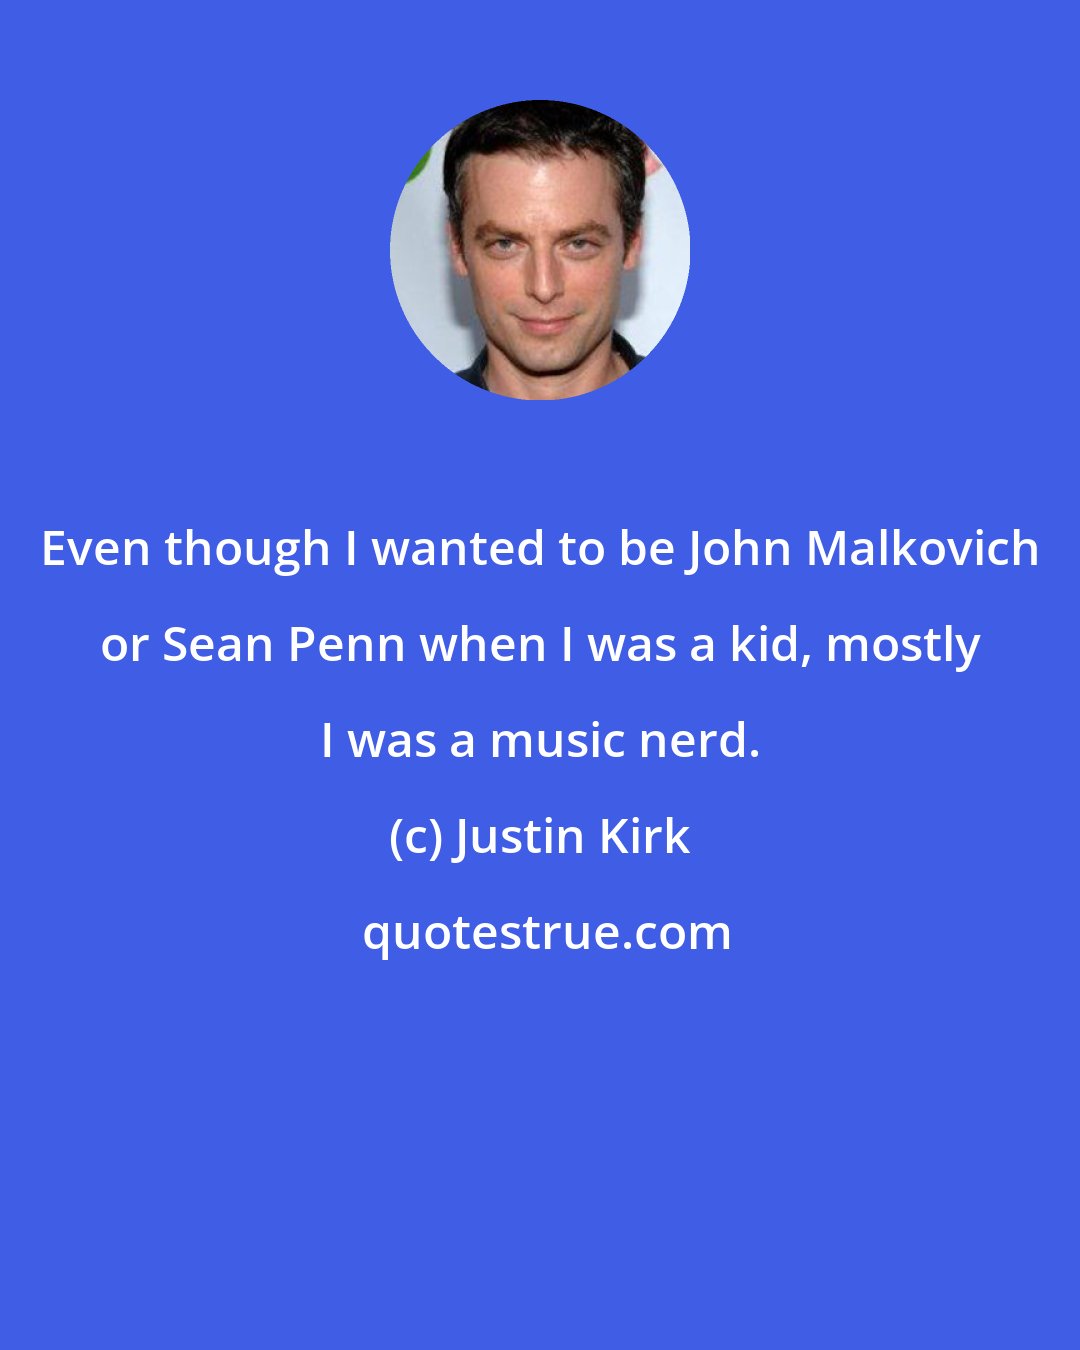 Justin Kirk: Even though I wanted to be John Malkovich or Sean Penn when I was a kid, mostly I was a music nerd.